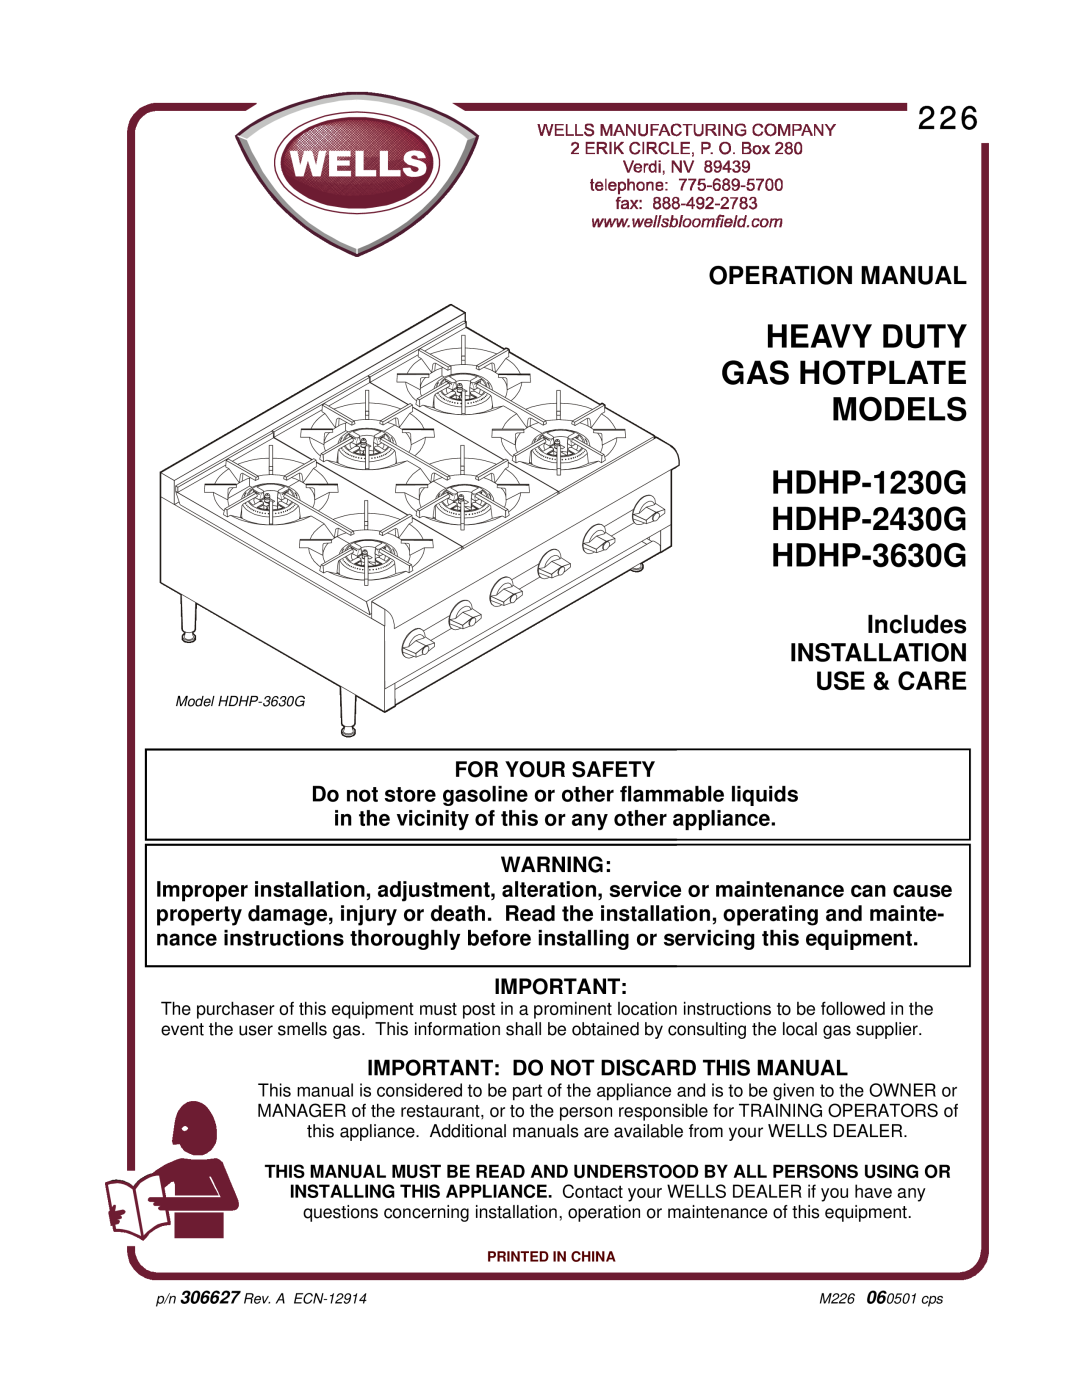 Wells HDHP-1230G, HDHP-3630G operation manual Includes INSTALLATION USE & CARE, Important Do Not Discard This Manual, fax 